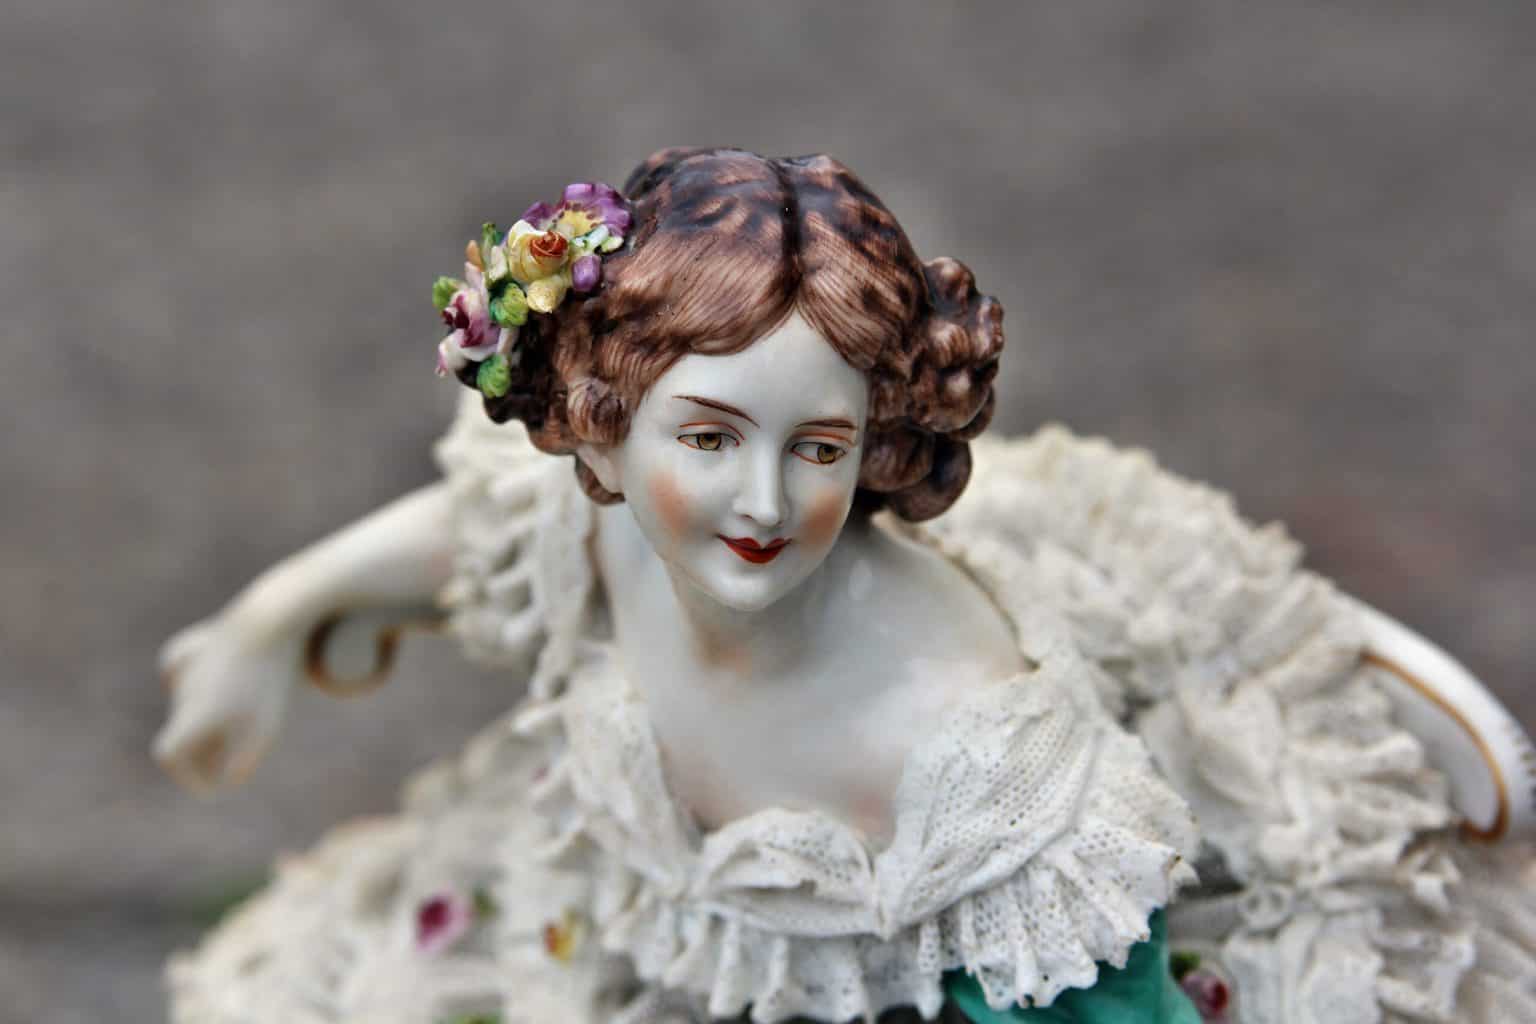 A porcelain figurine of a woman in a white dress